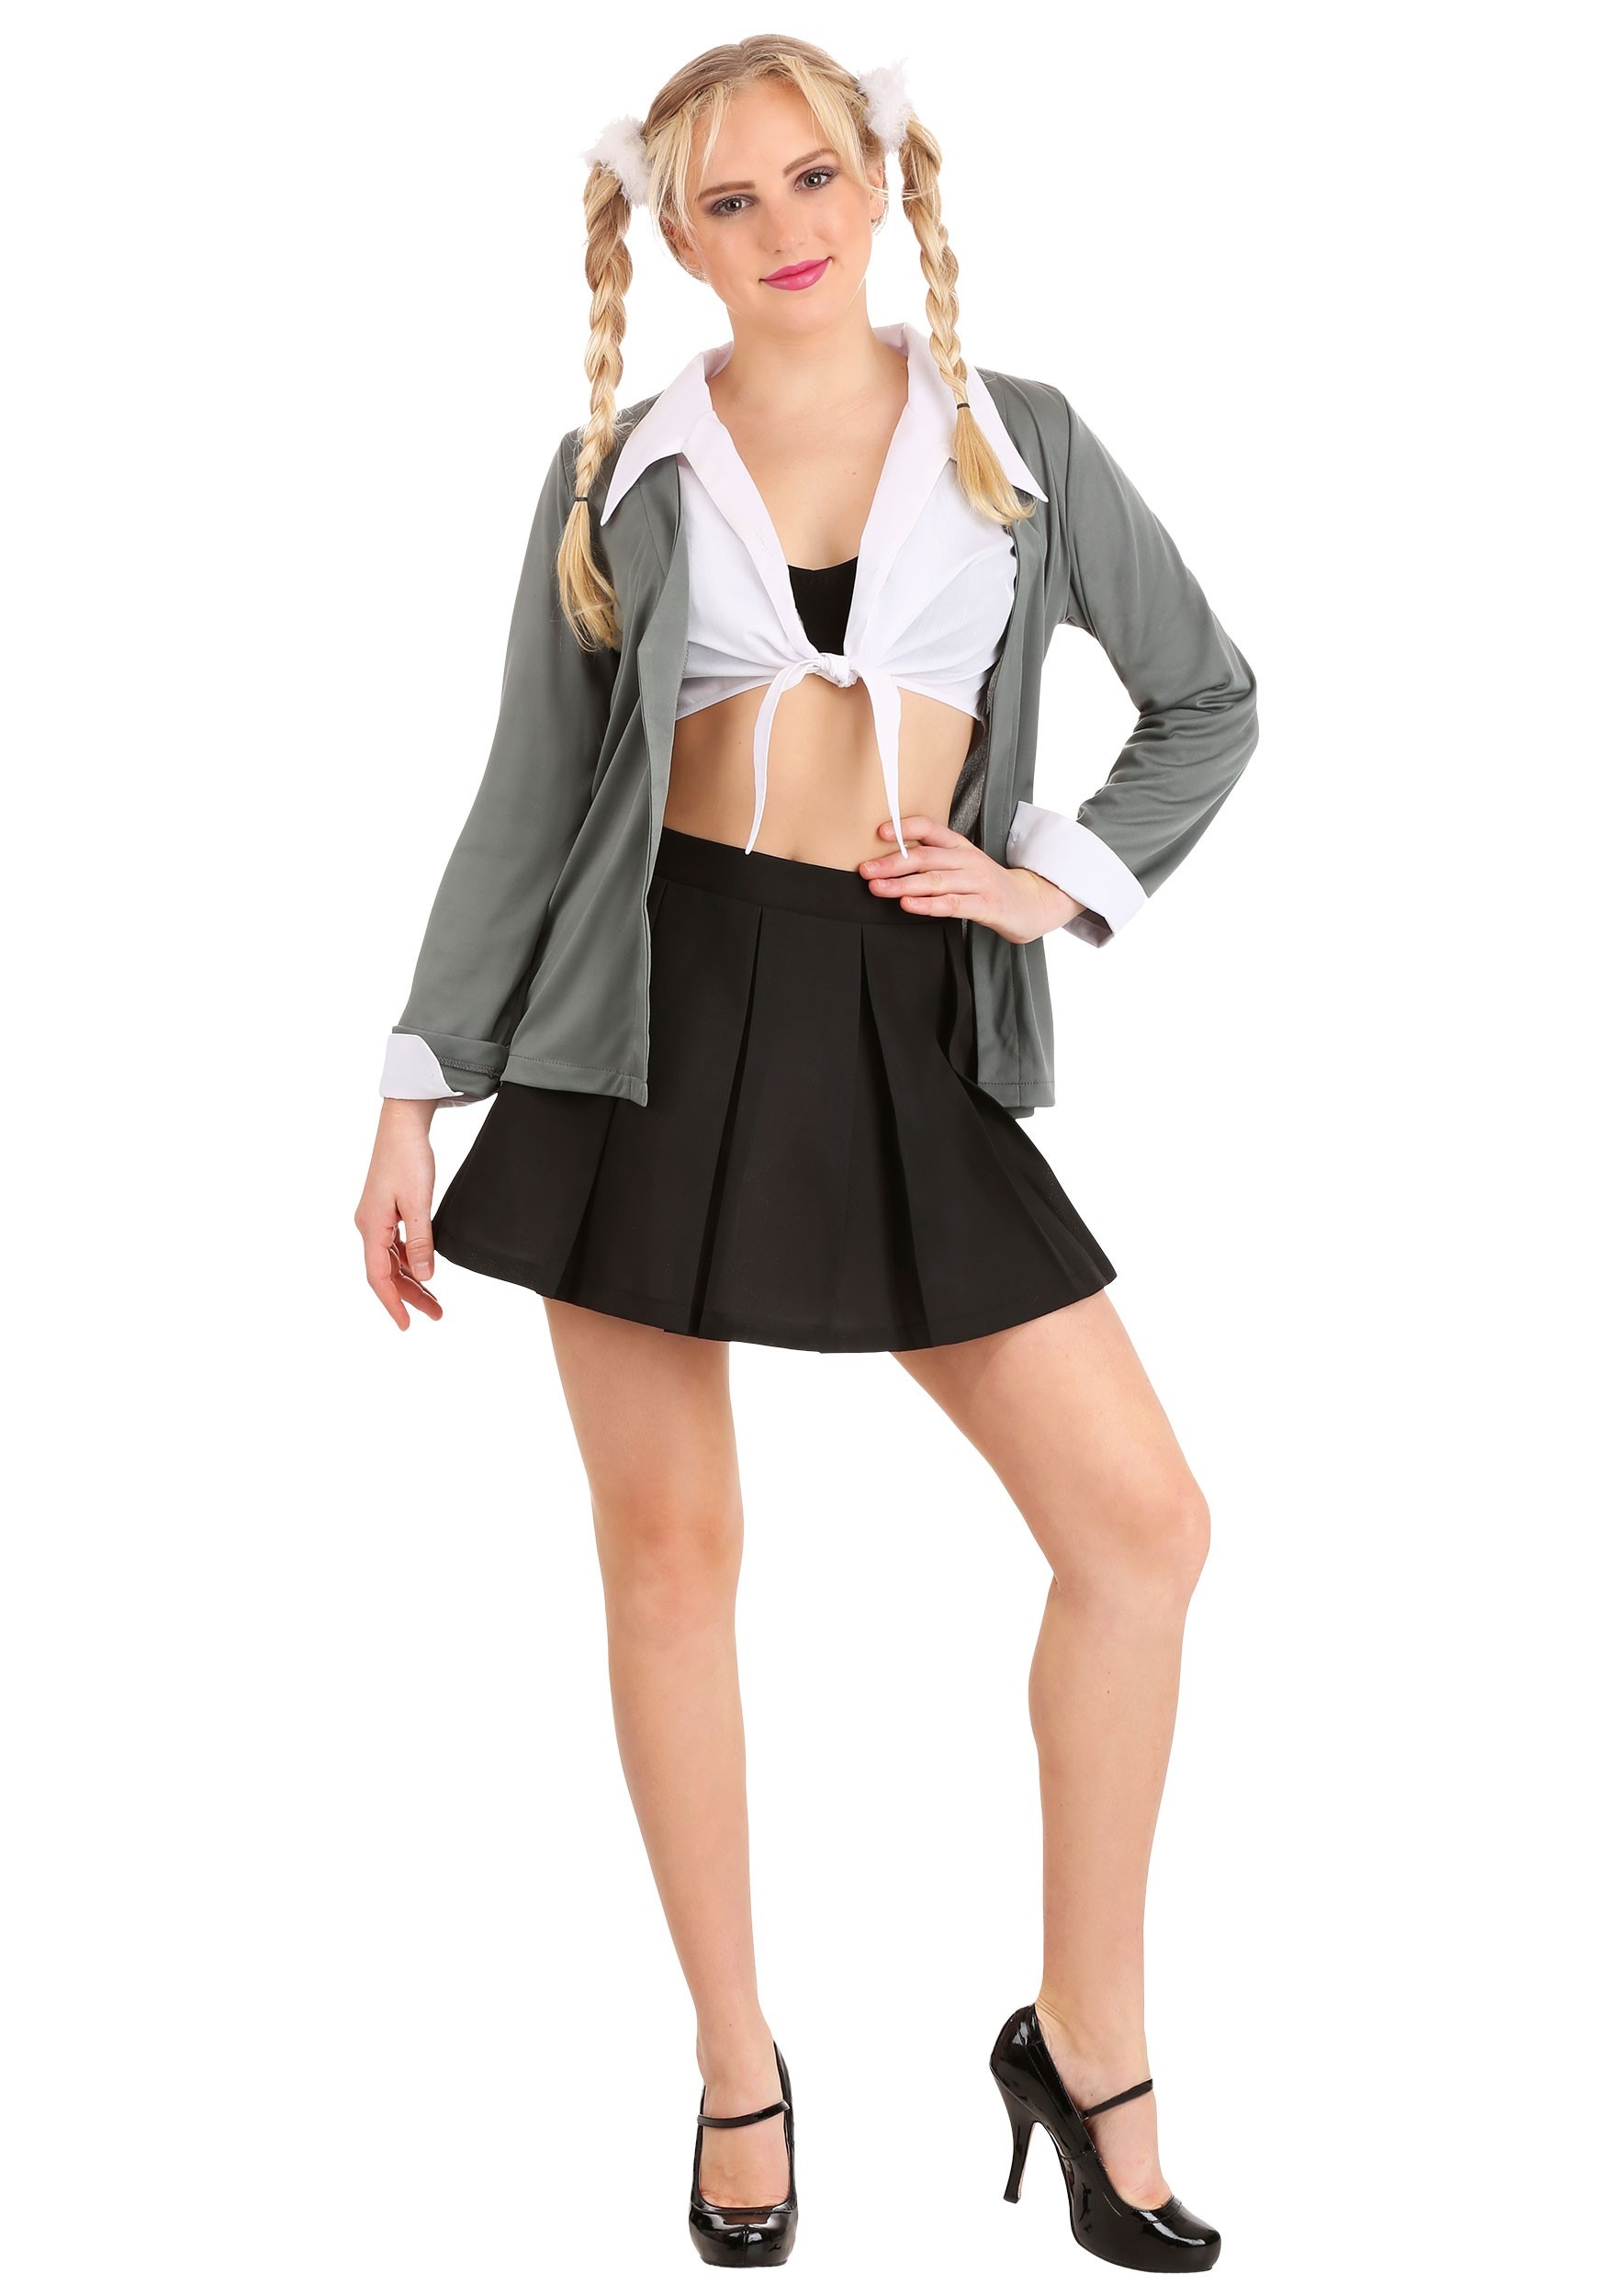 One More Time Pop Singer Costume For Women , Exclusive